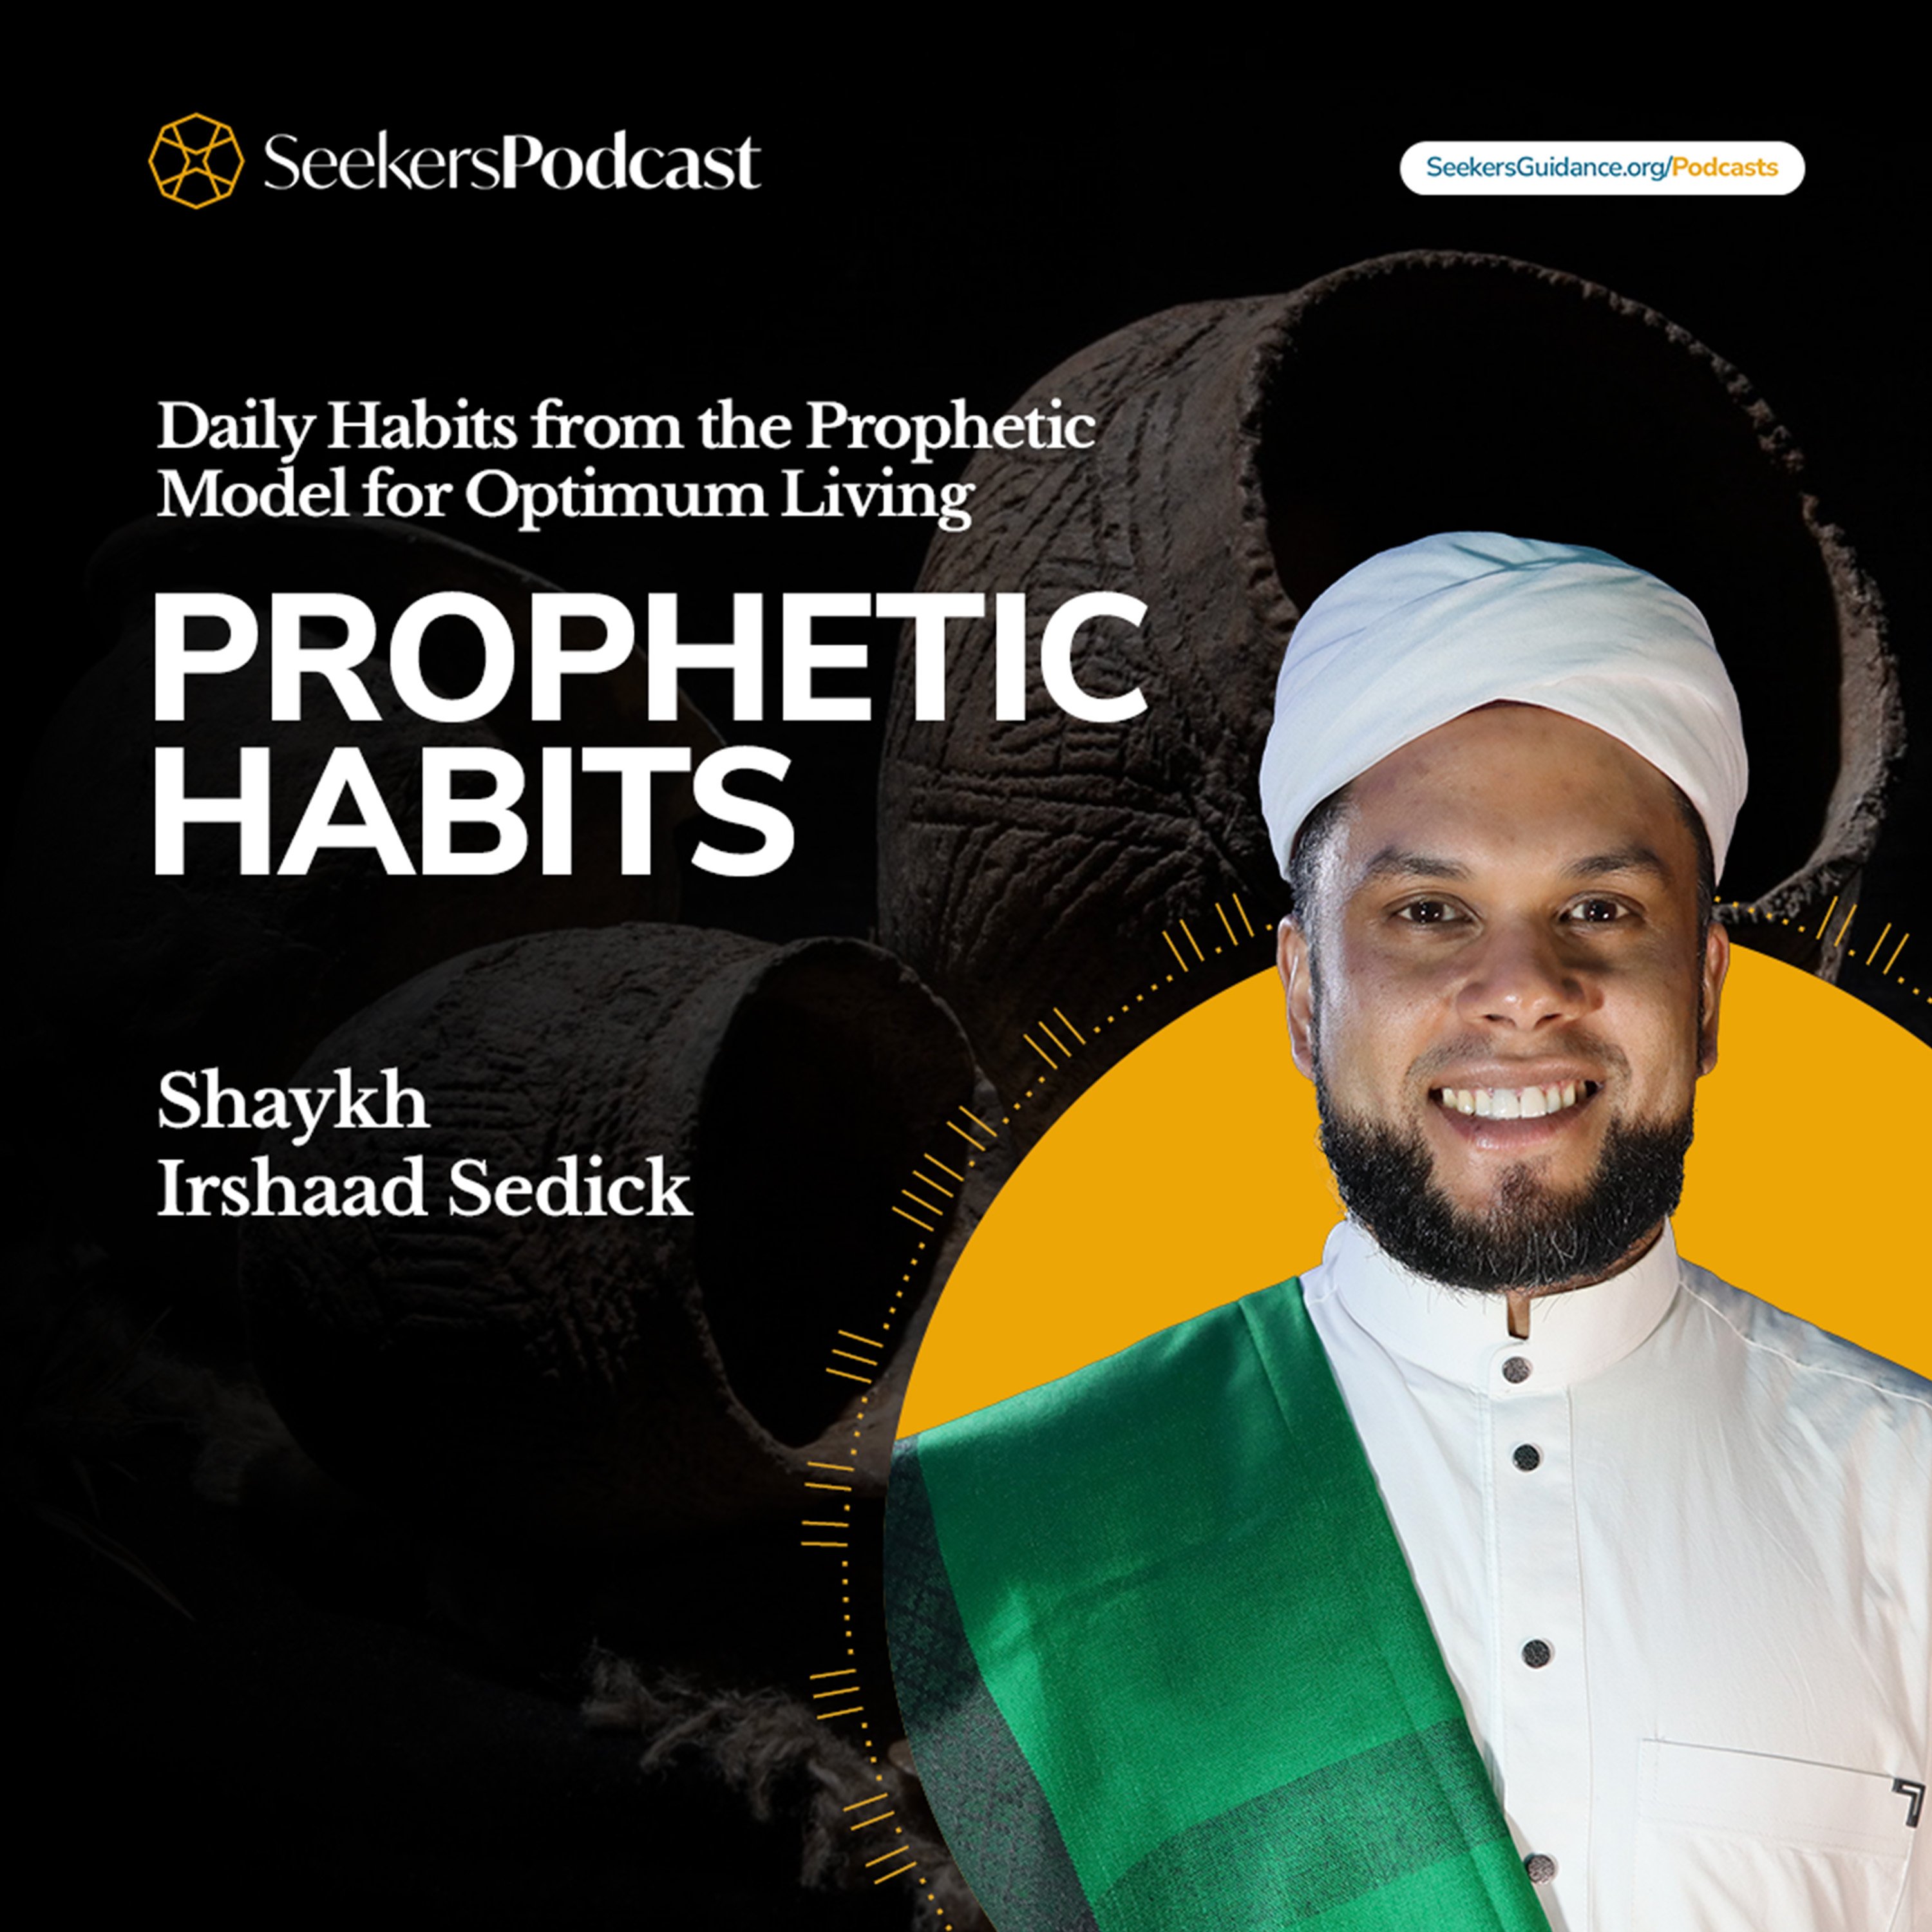 Prophetic Habits: Daily Habits from the Prophetic Model for Optimum Living.